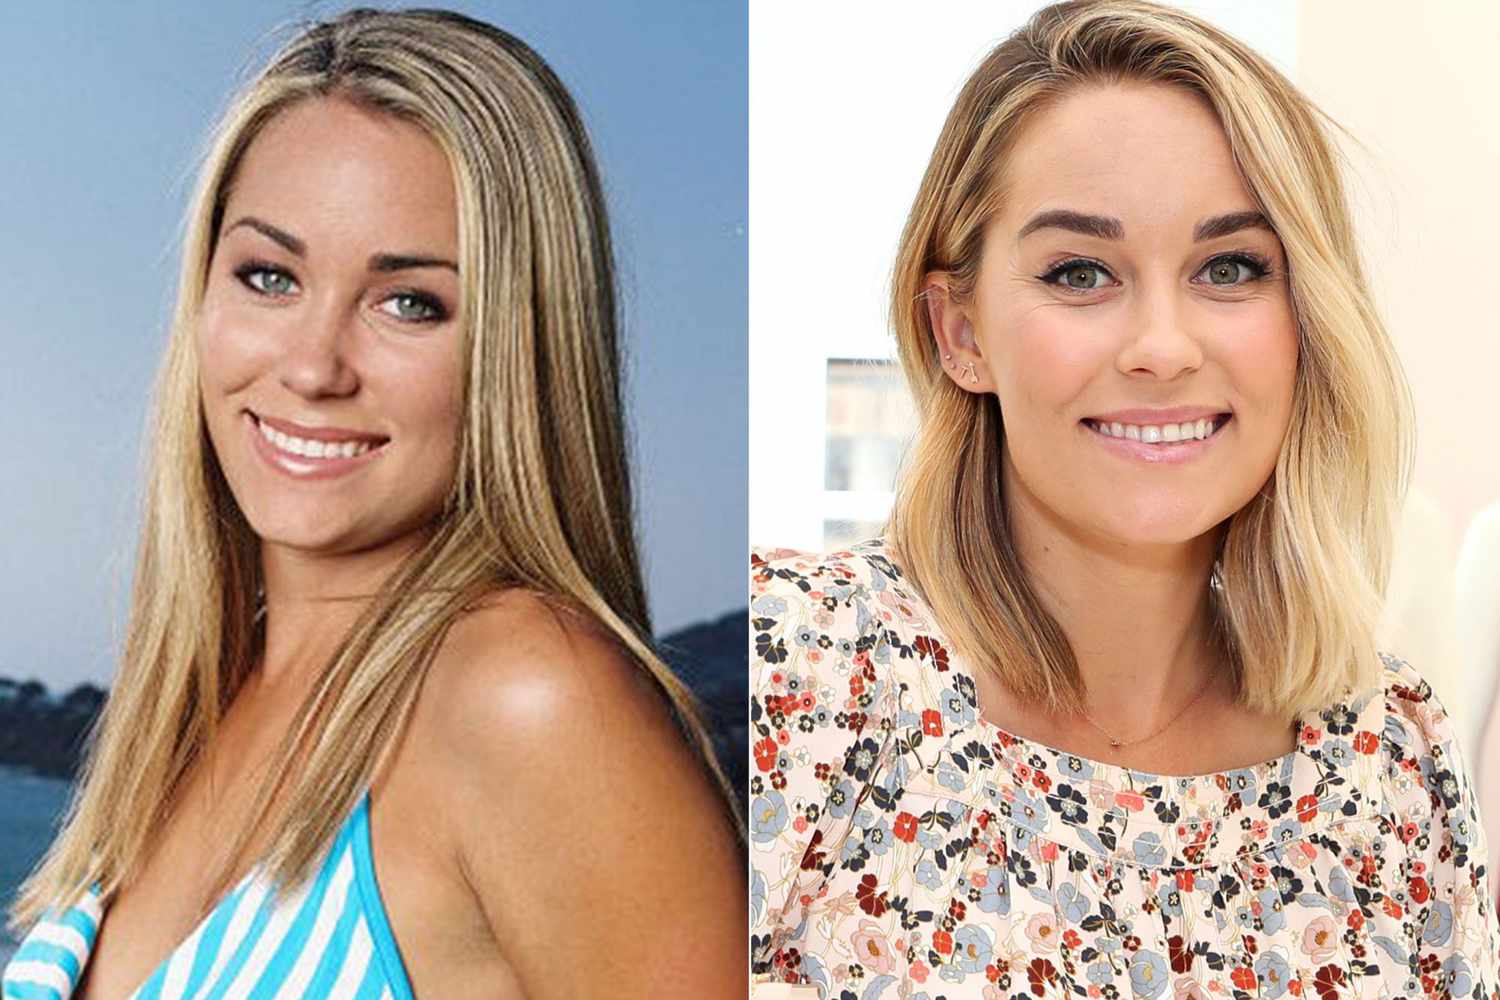 Where is jade from the hills now